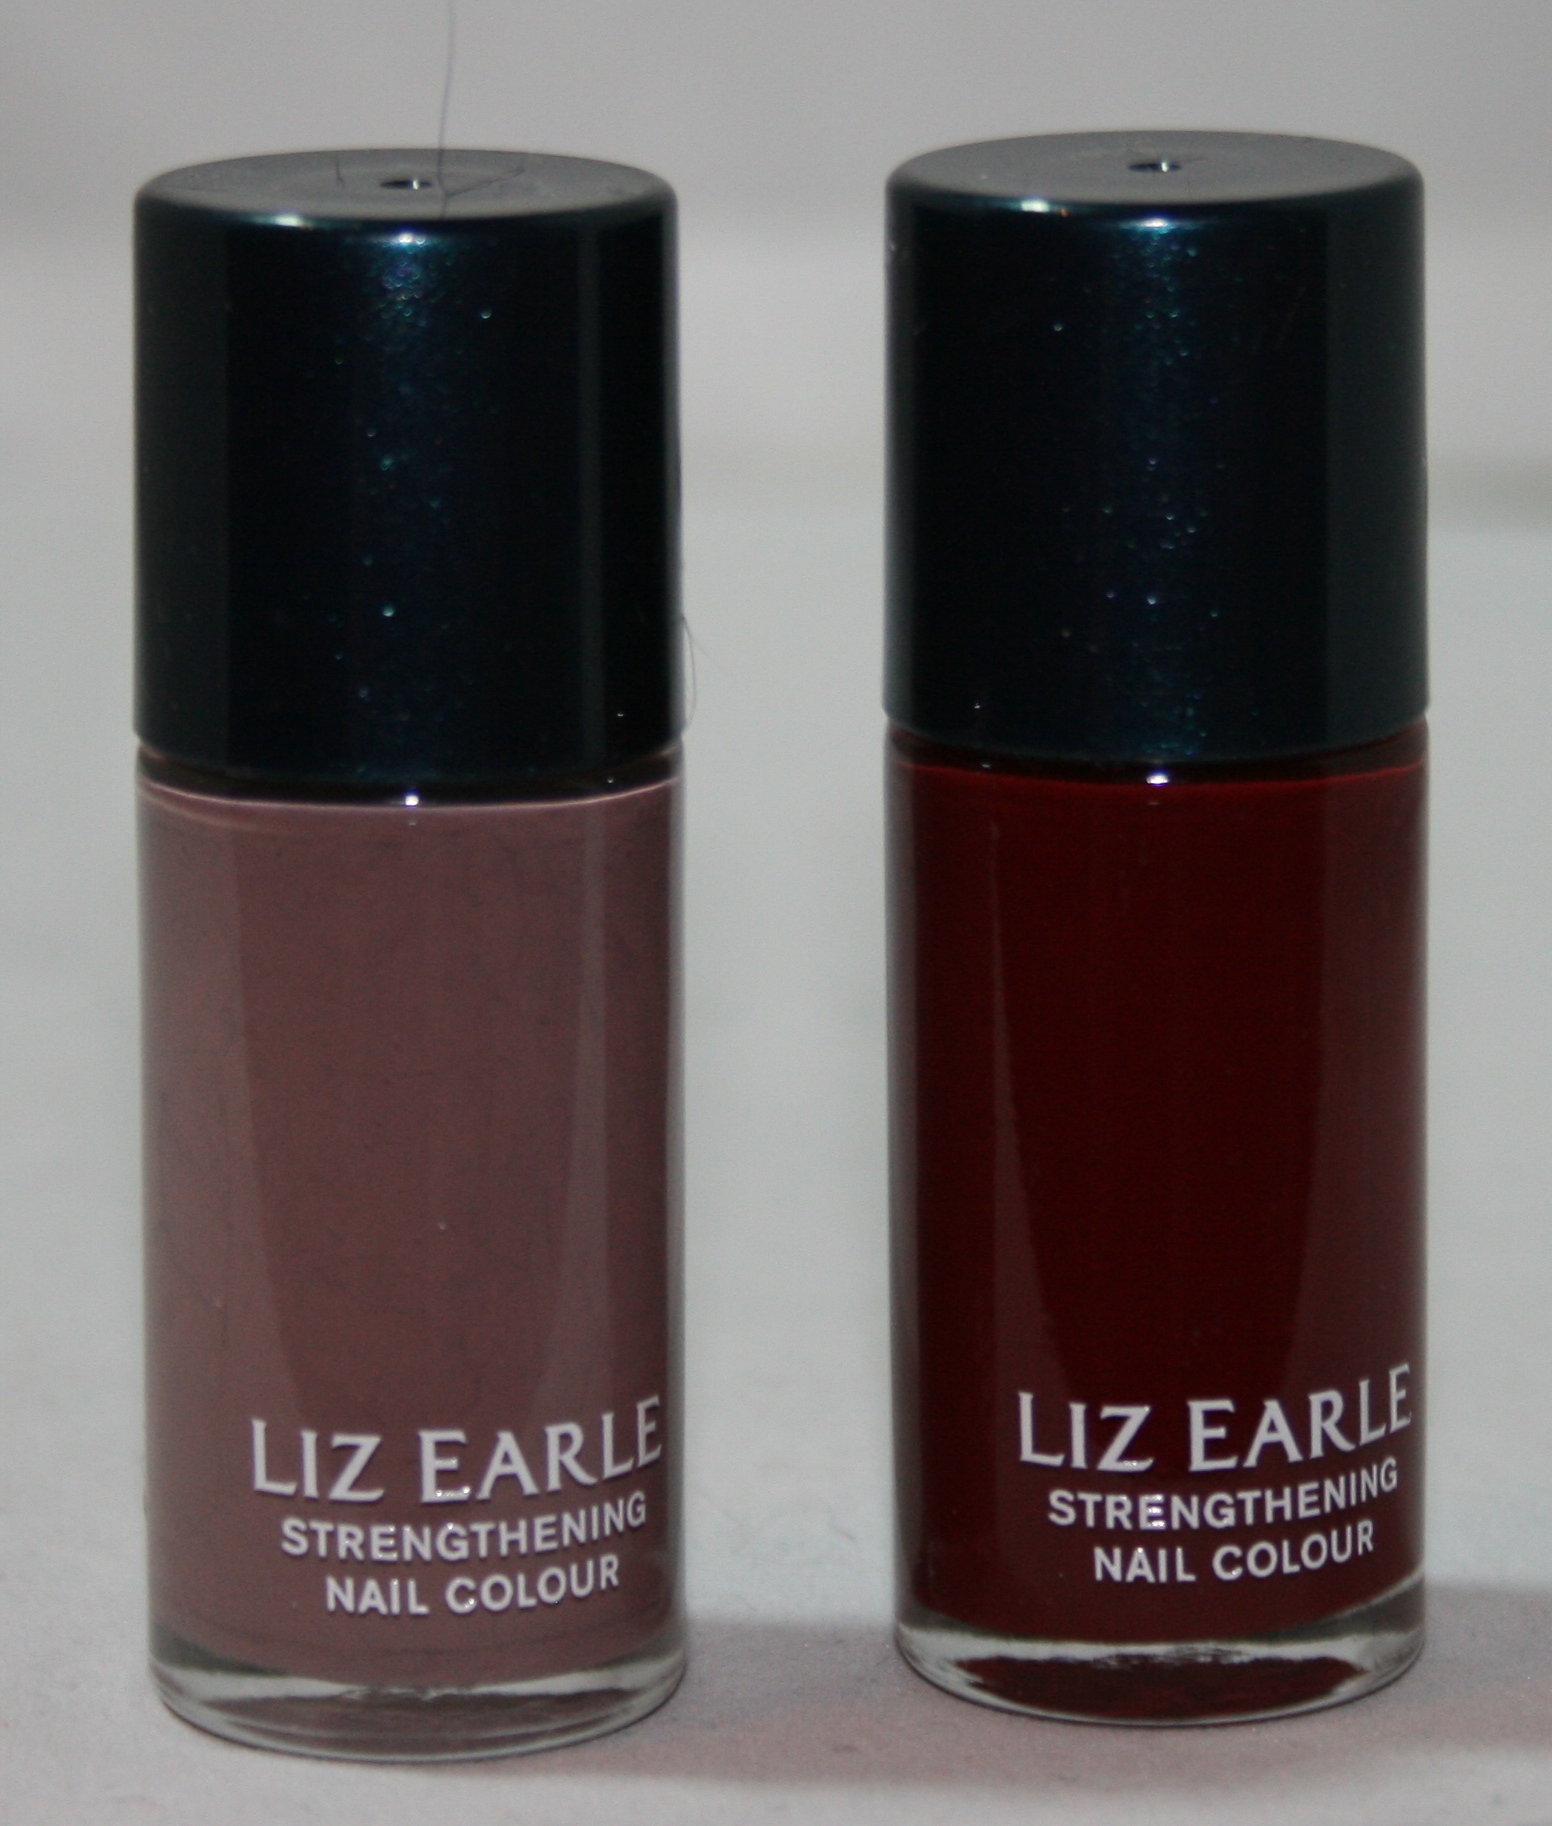 Liz Earle Strengthening Nail Colour – Ebb Tide and Pure Poetry